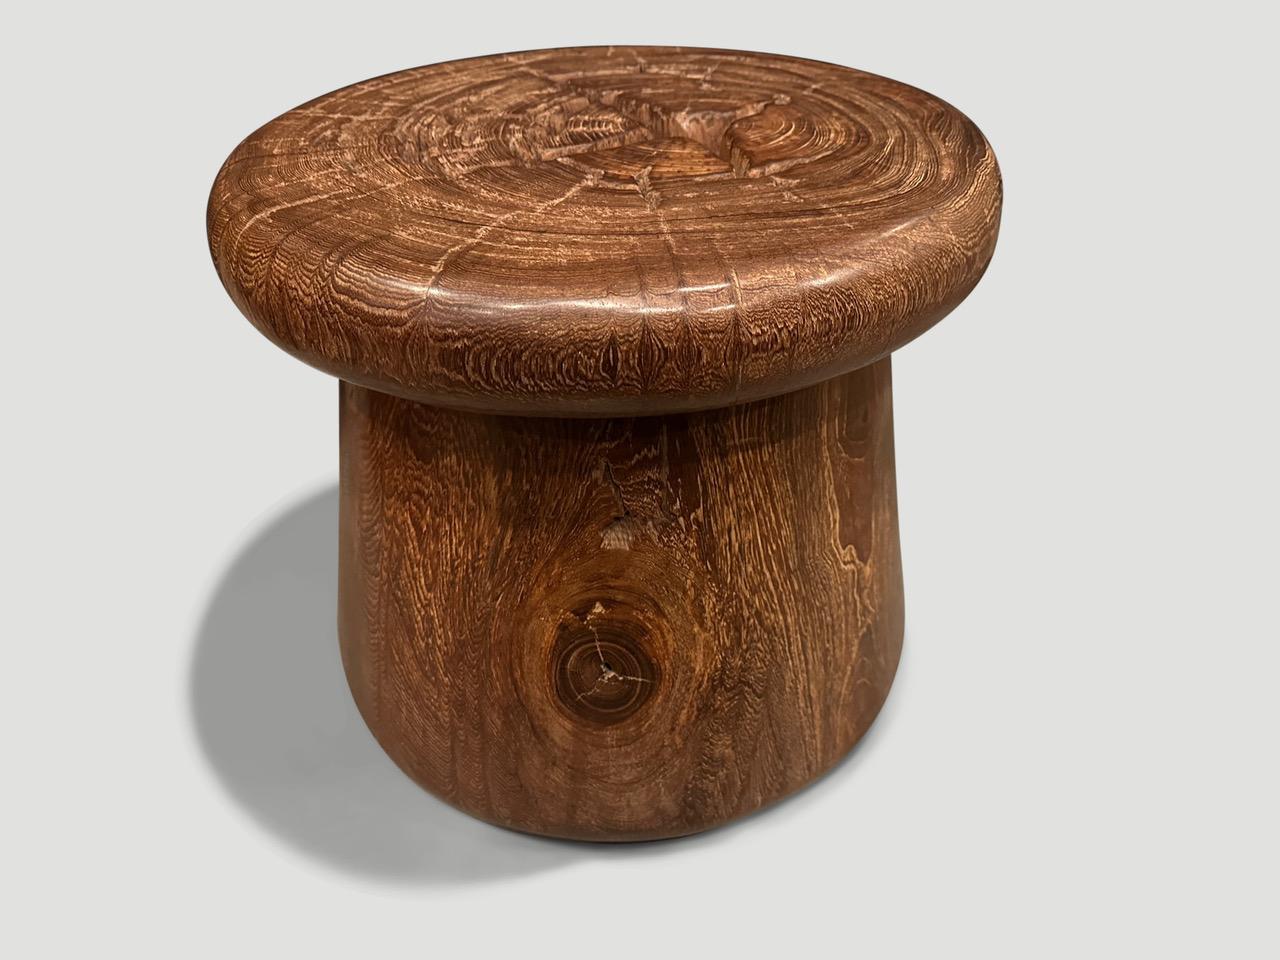 Andrianna Shamaris Century Old Teak Wood Side Table or Stool  In Excellent Condition For Sale In New York, NY